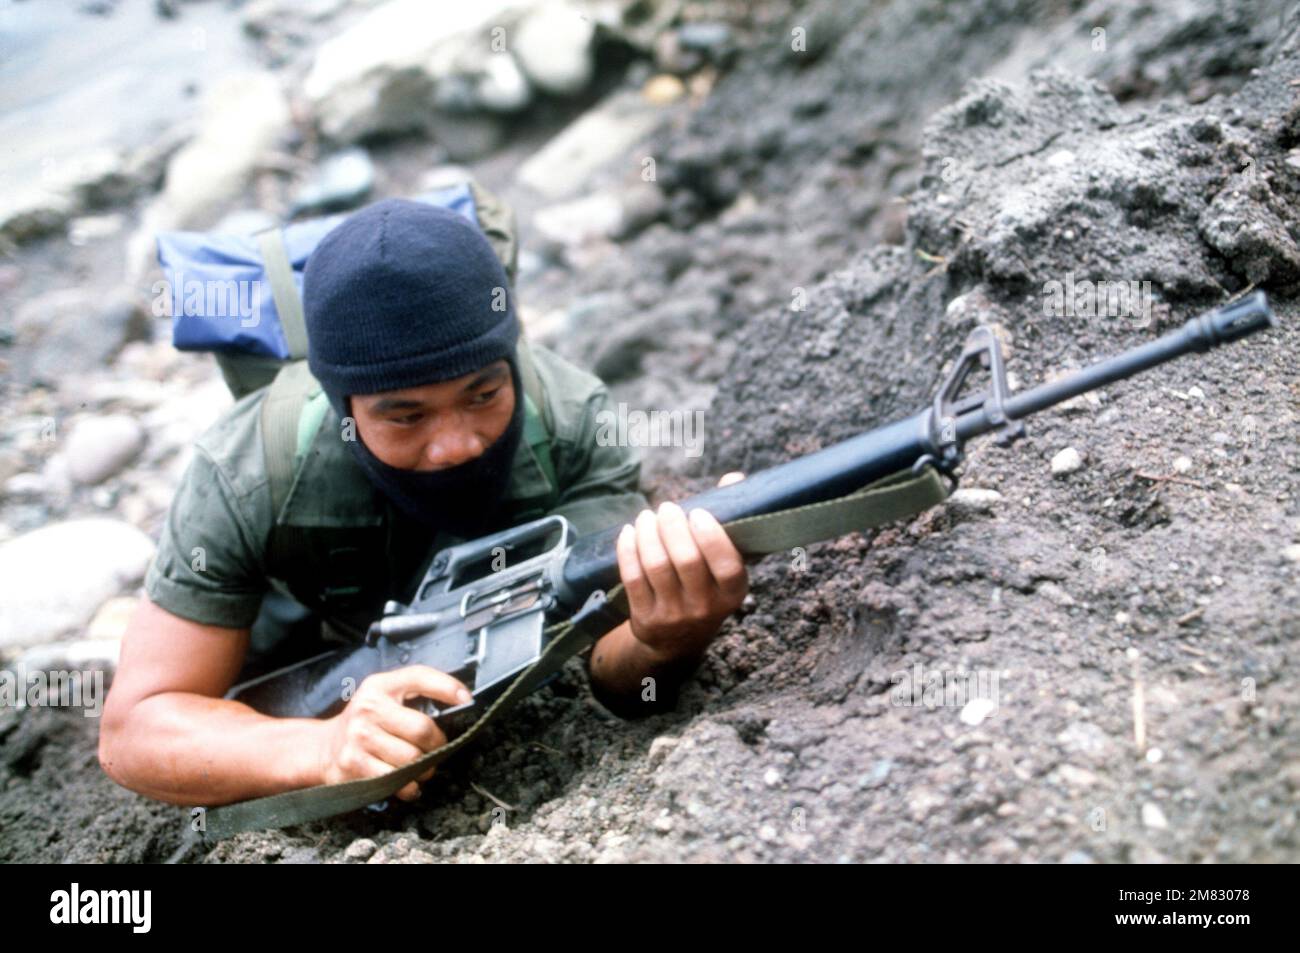 A member of the Philippine Special Forces, armed with an M16A1 rifle, prepare for battle as part of the reenactment of General MacArthur's landing at Red Beach on October 20, 1944. Base: Leyte Island Country: Philippines (PHL) Stock Photo